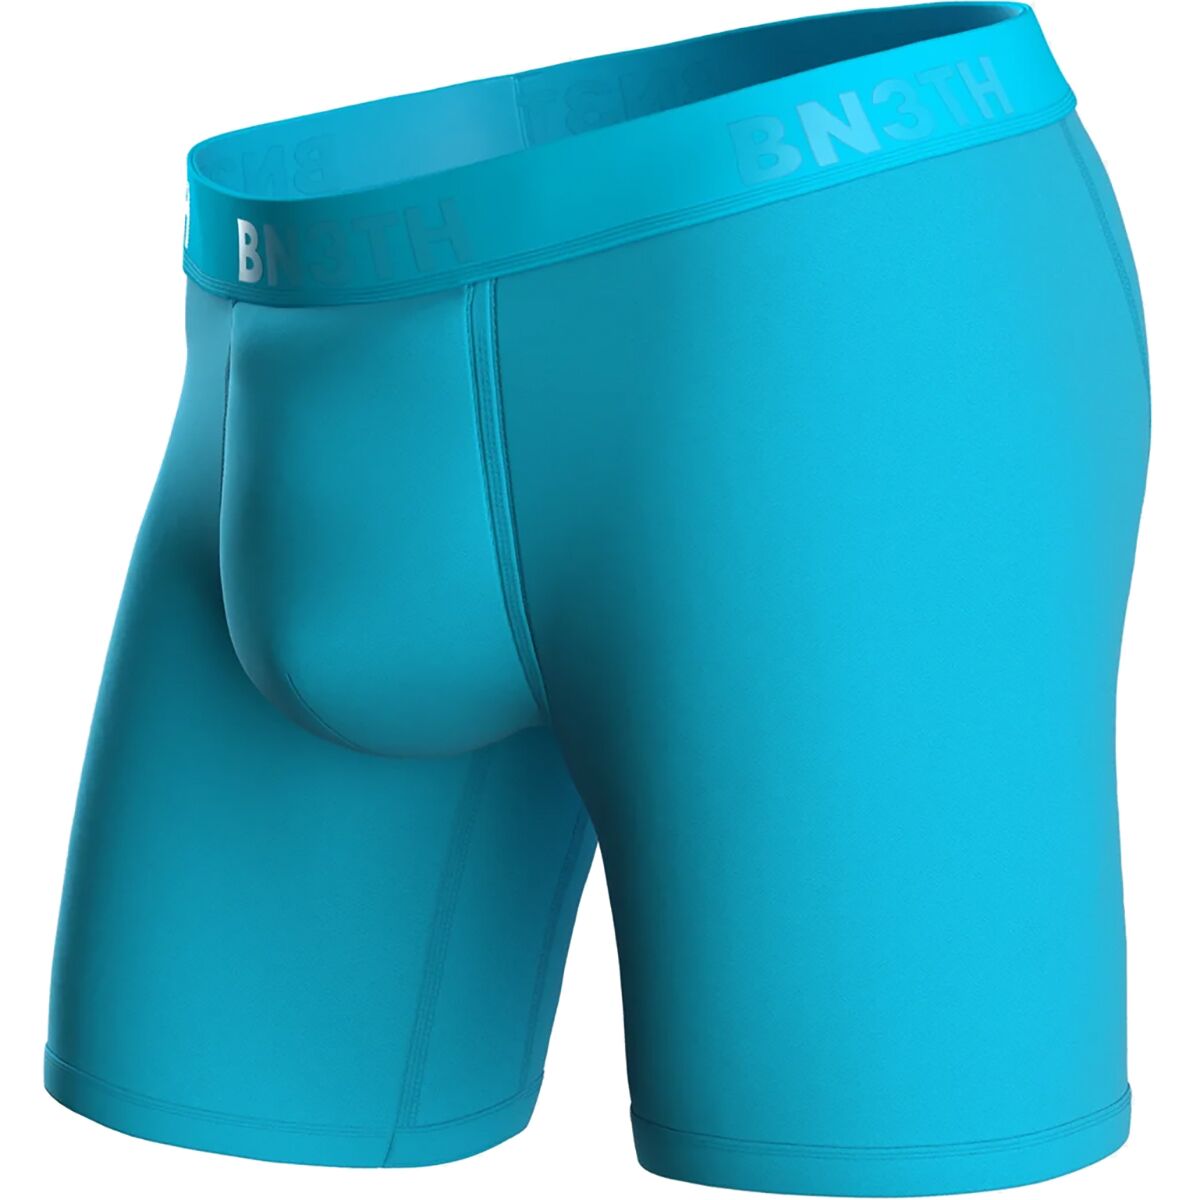 BN3TH Classic Boxer Brief Solid - Men's - Clothing